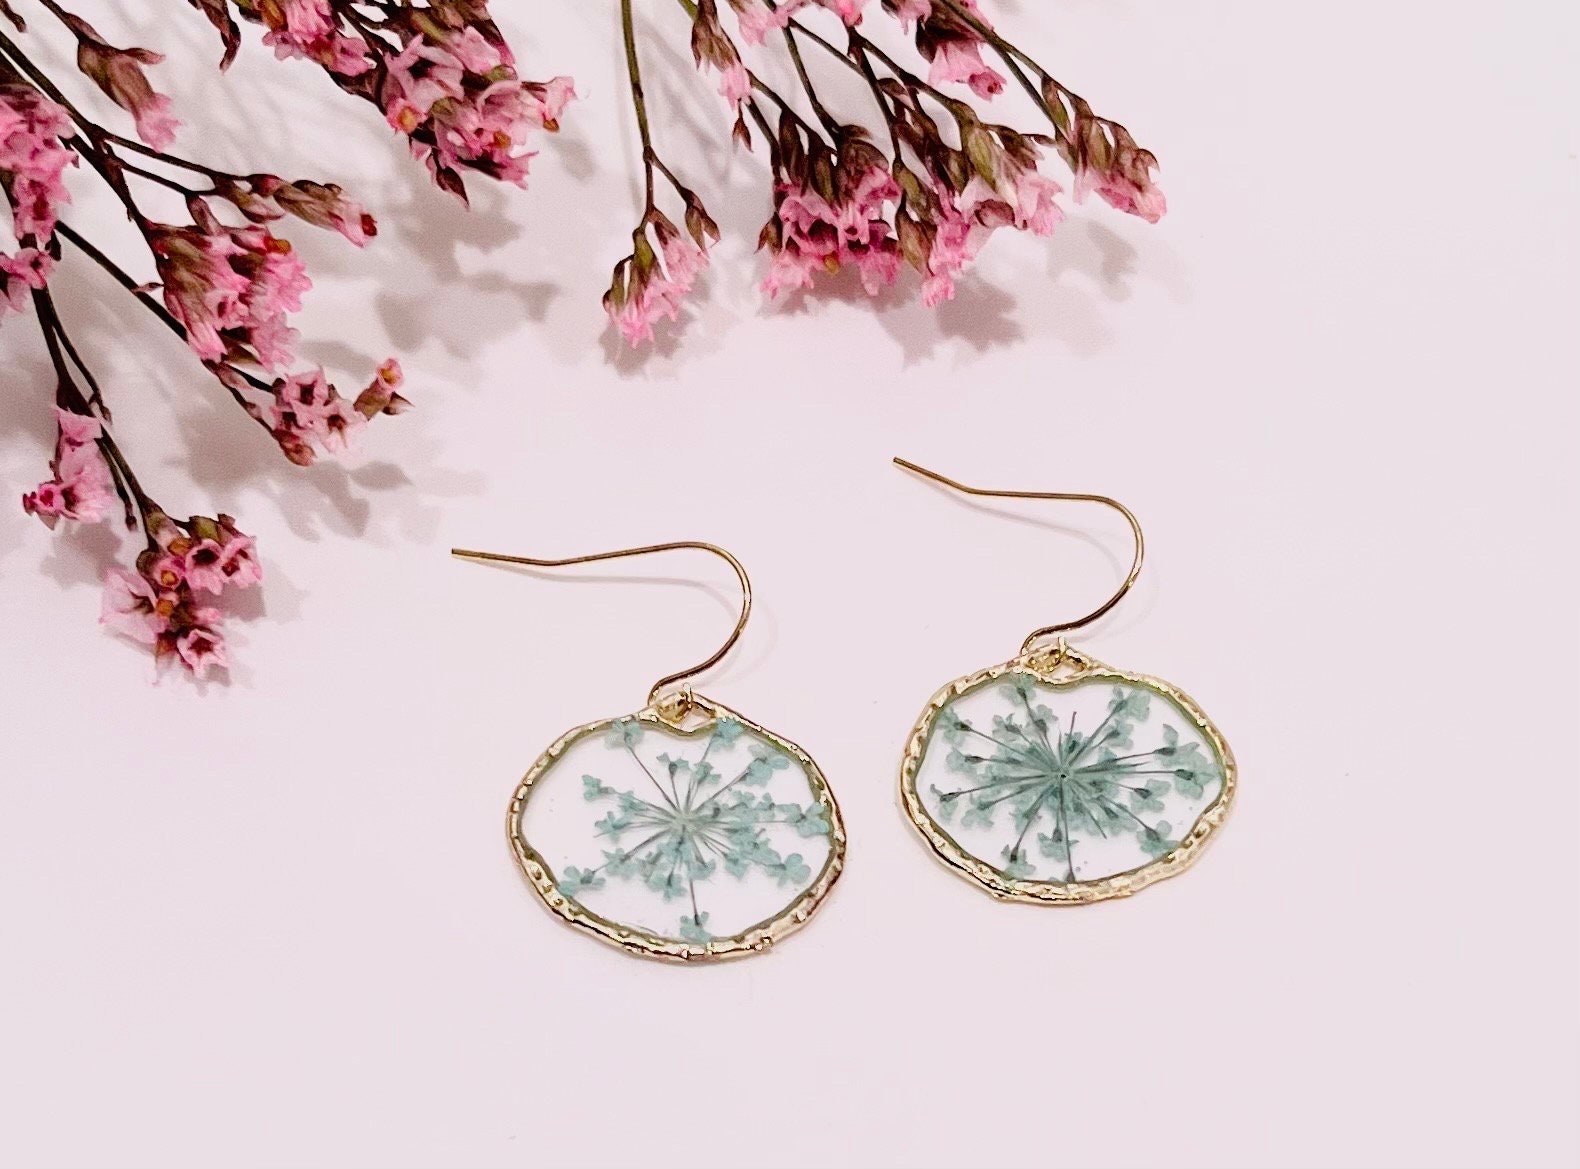 Handmade with pressed flowers. Hypoallergenic Earrings. Mint Green Queen Anne’s Lace Flowers. Minimalist. 14K Gold Plated Hooks.